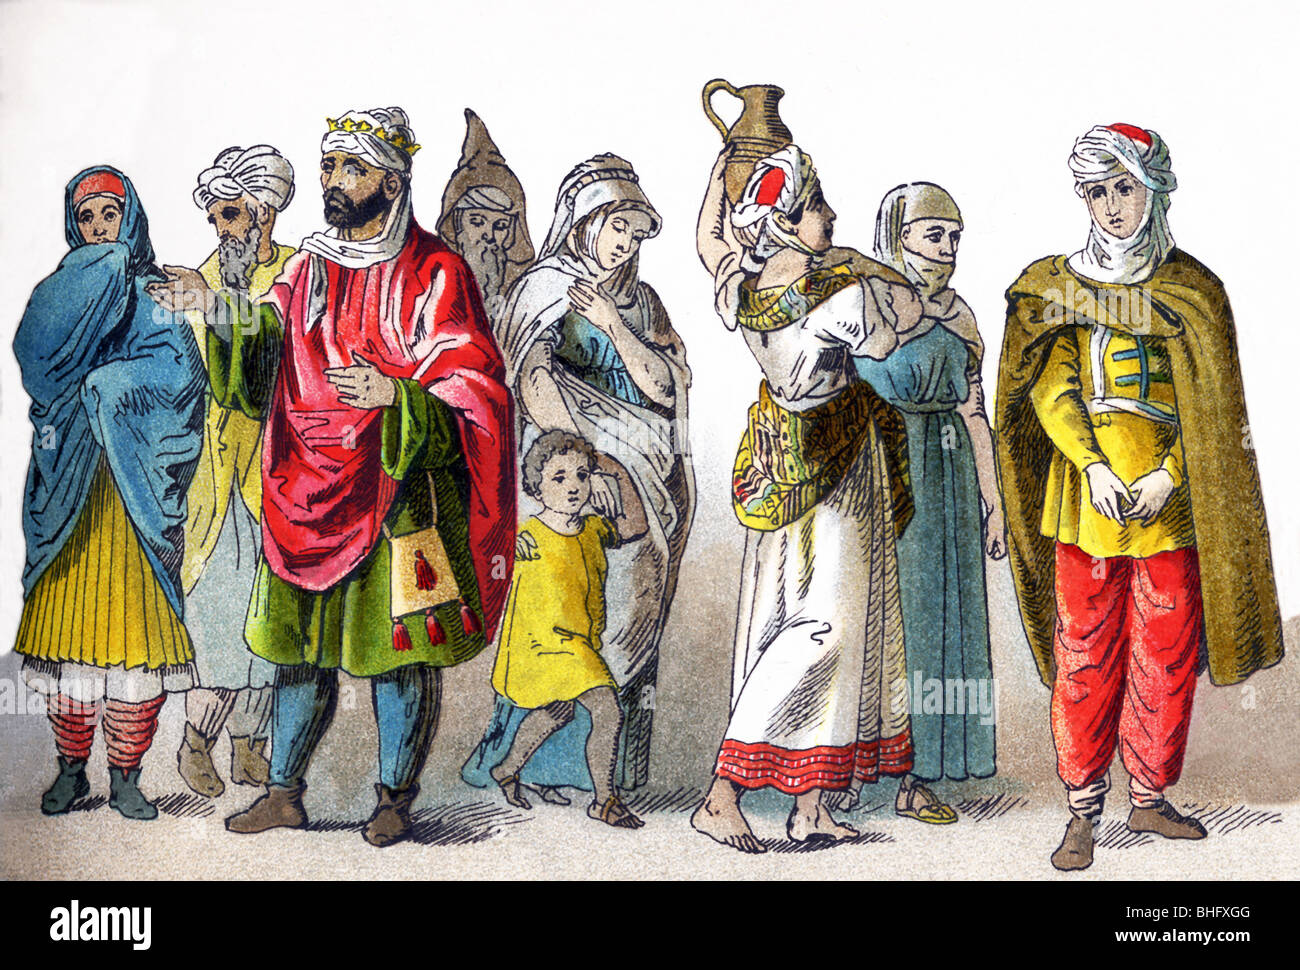 These figures represent Moors during the Ottoman Empire, all in 1500: woman, man, king, boy, women, man. Stock Photo